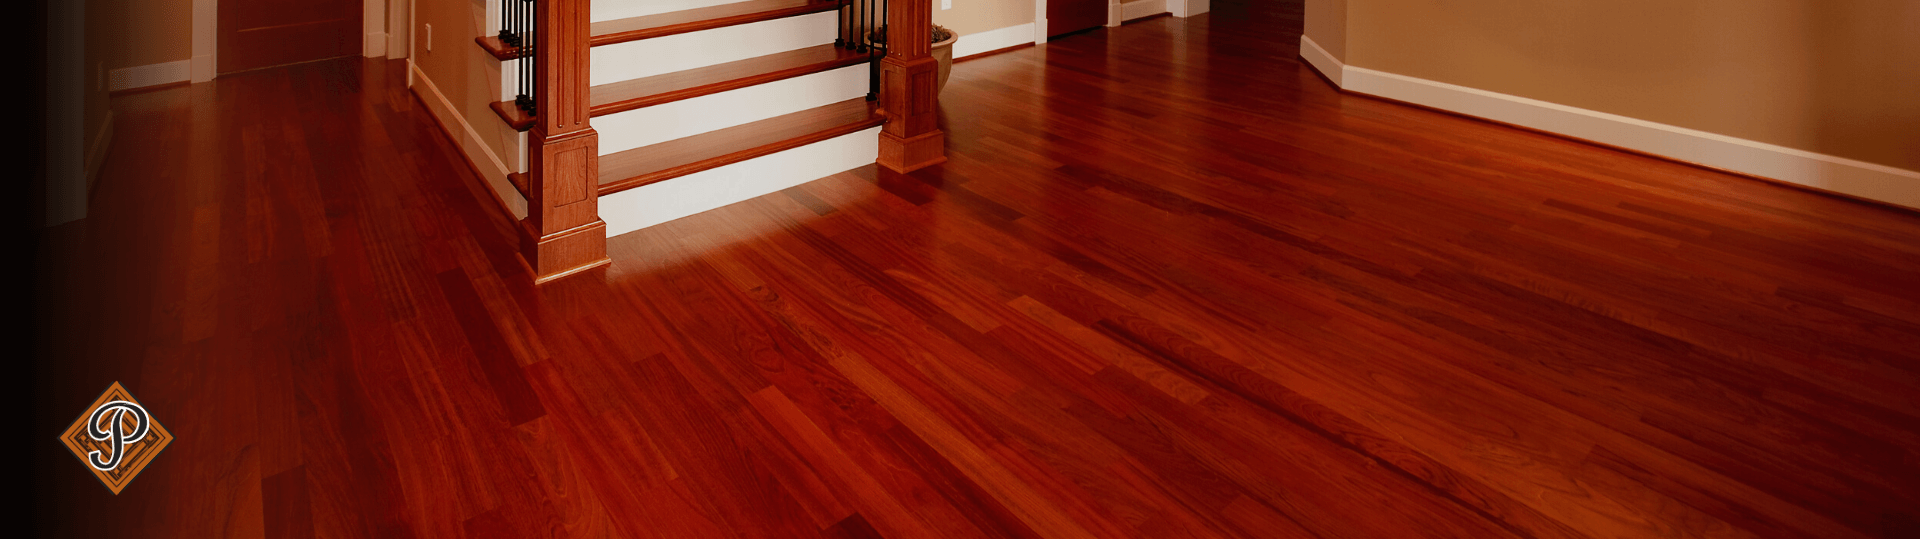 The Best Flooring to Increase Home Value